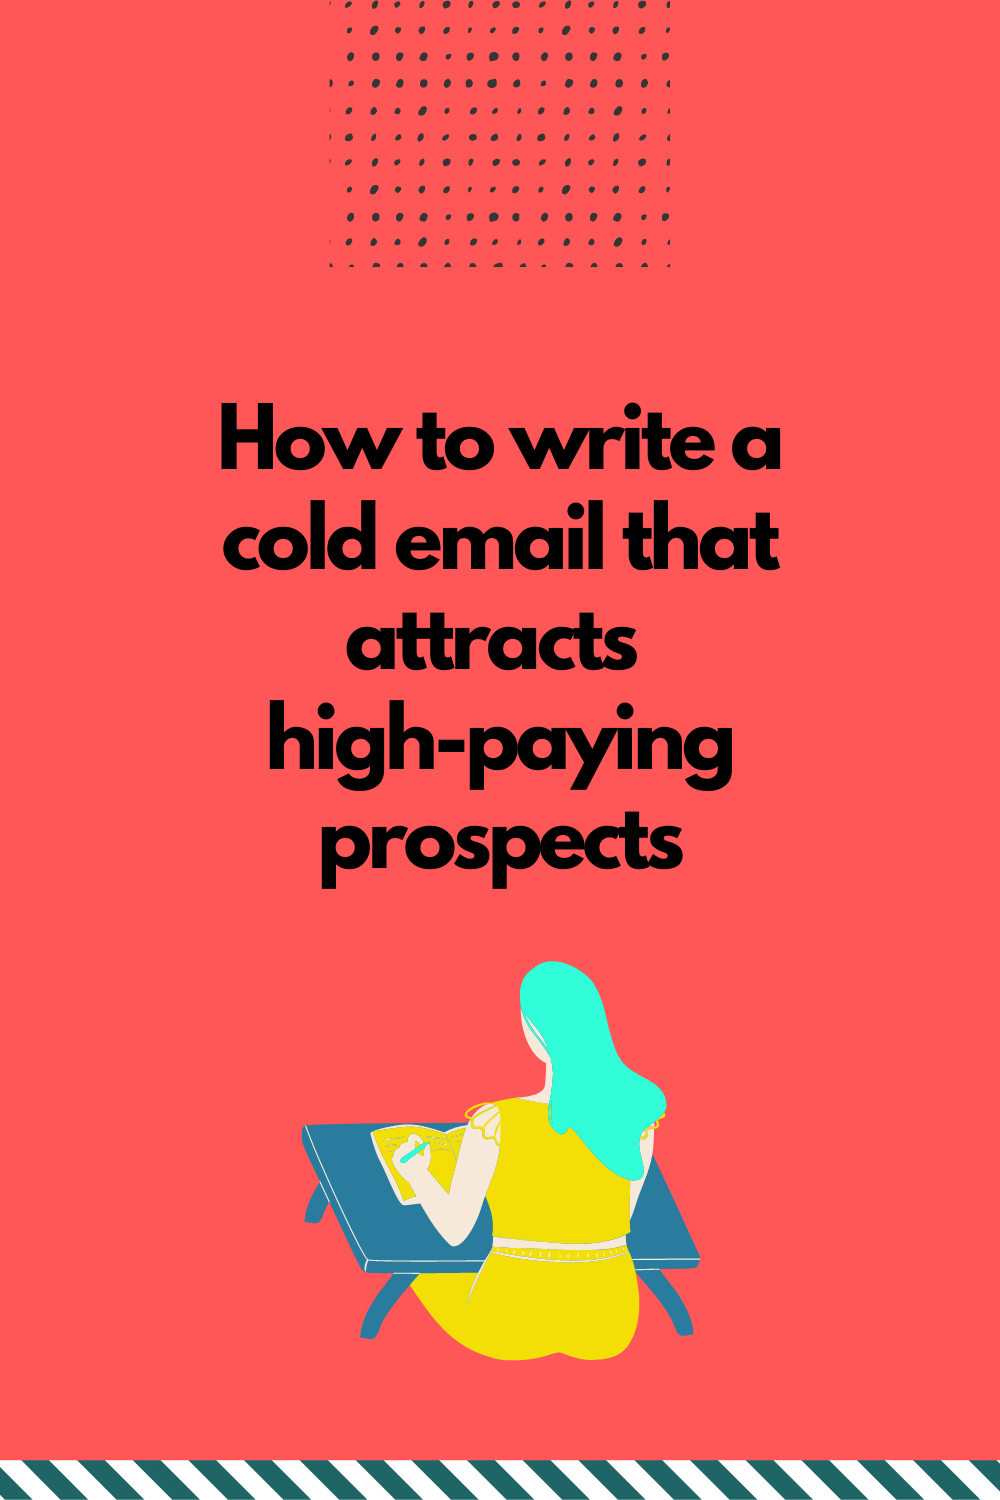 How to write a cold email that attracts high-paying freelance clients